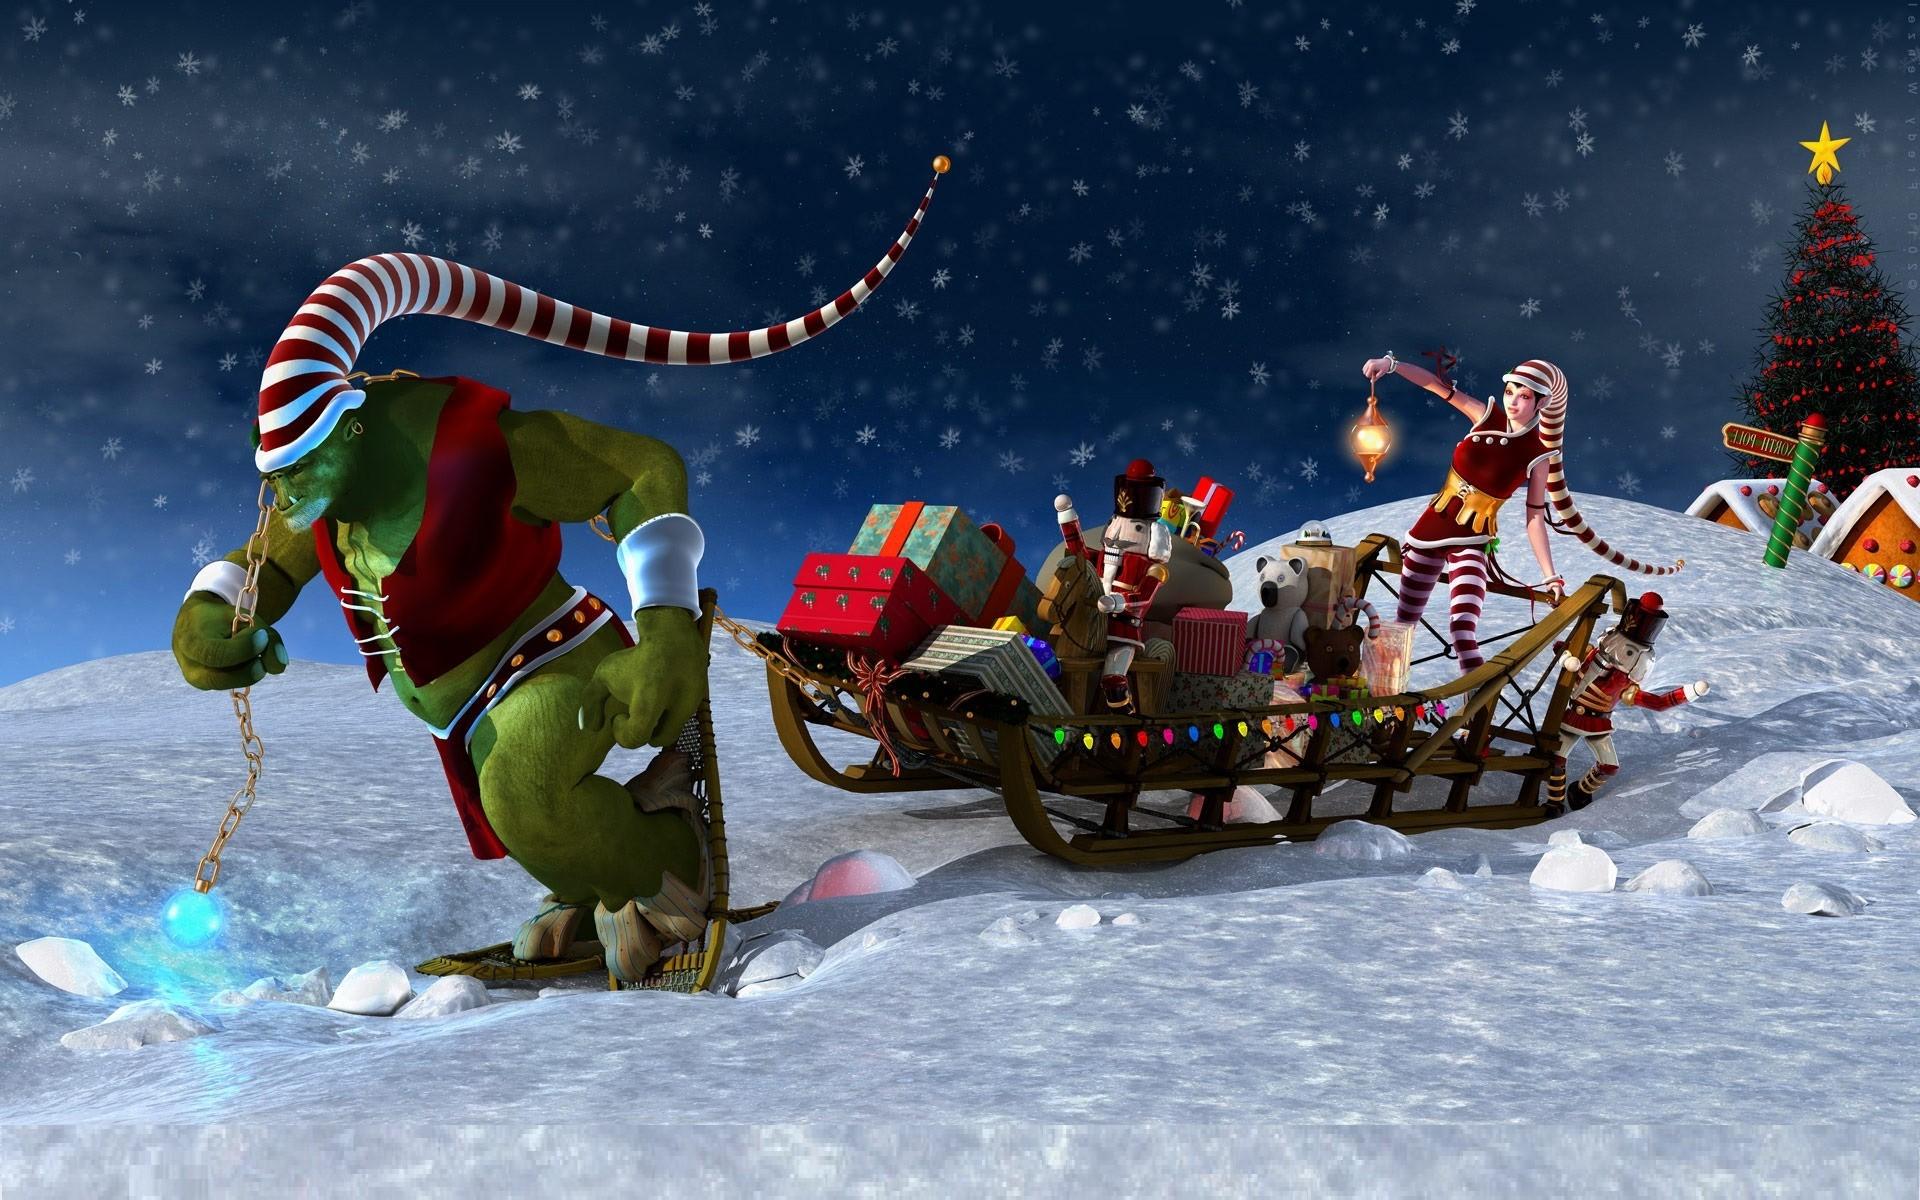 Free download Animated Christmas Background For Desktop